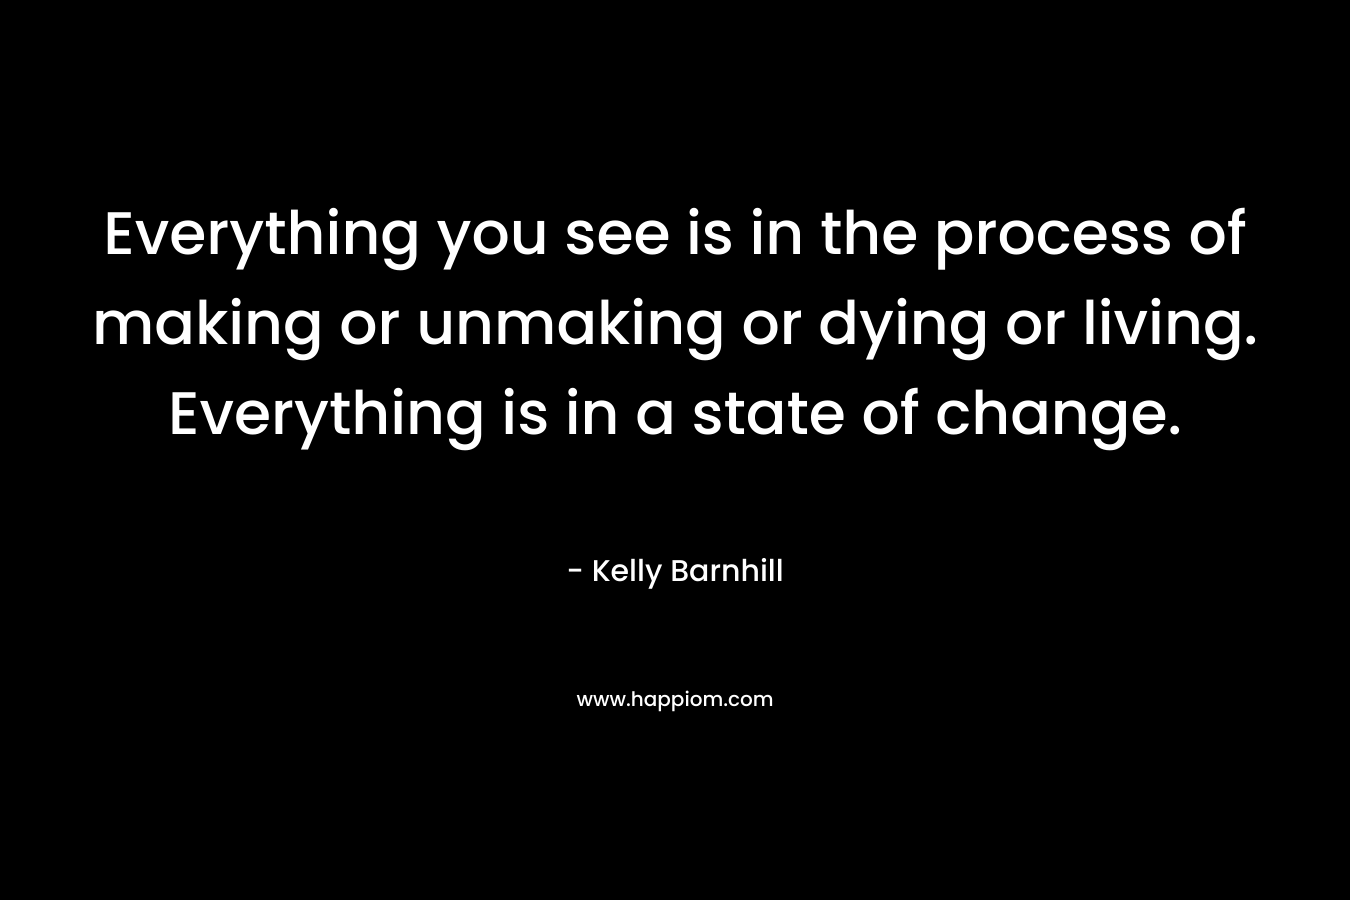 Everything you see is in the process of making or unmaking or dying or living. Everything is in a state of change.